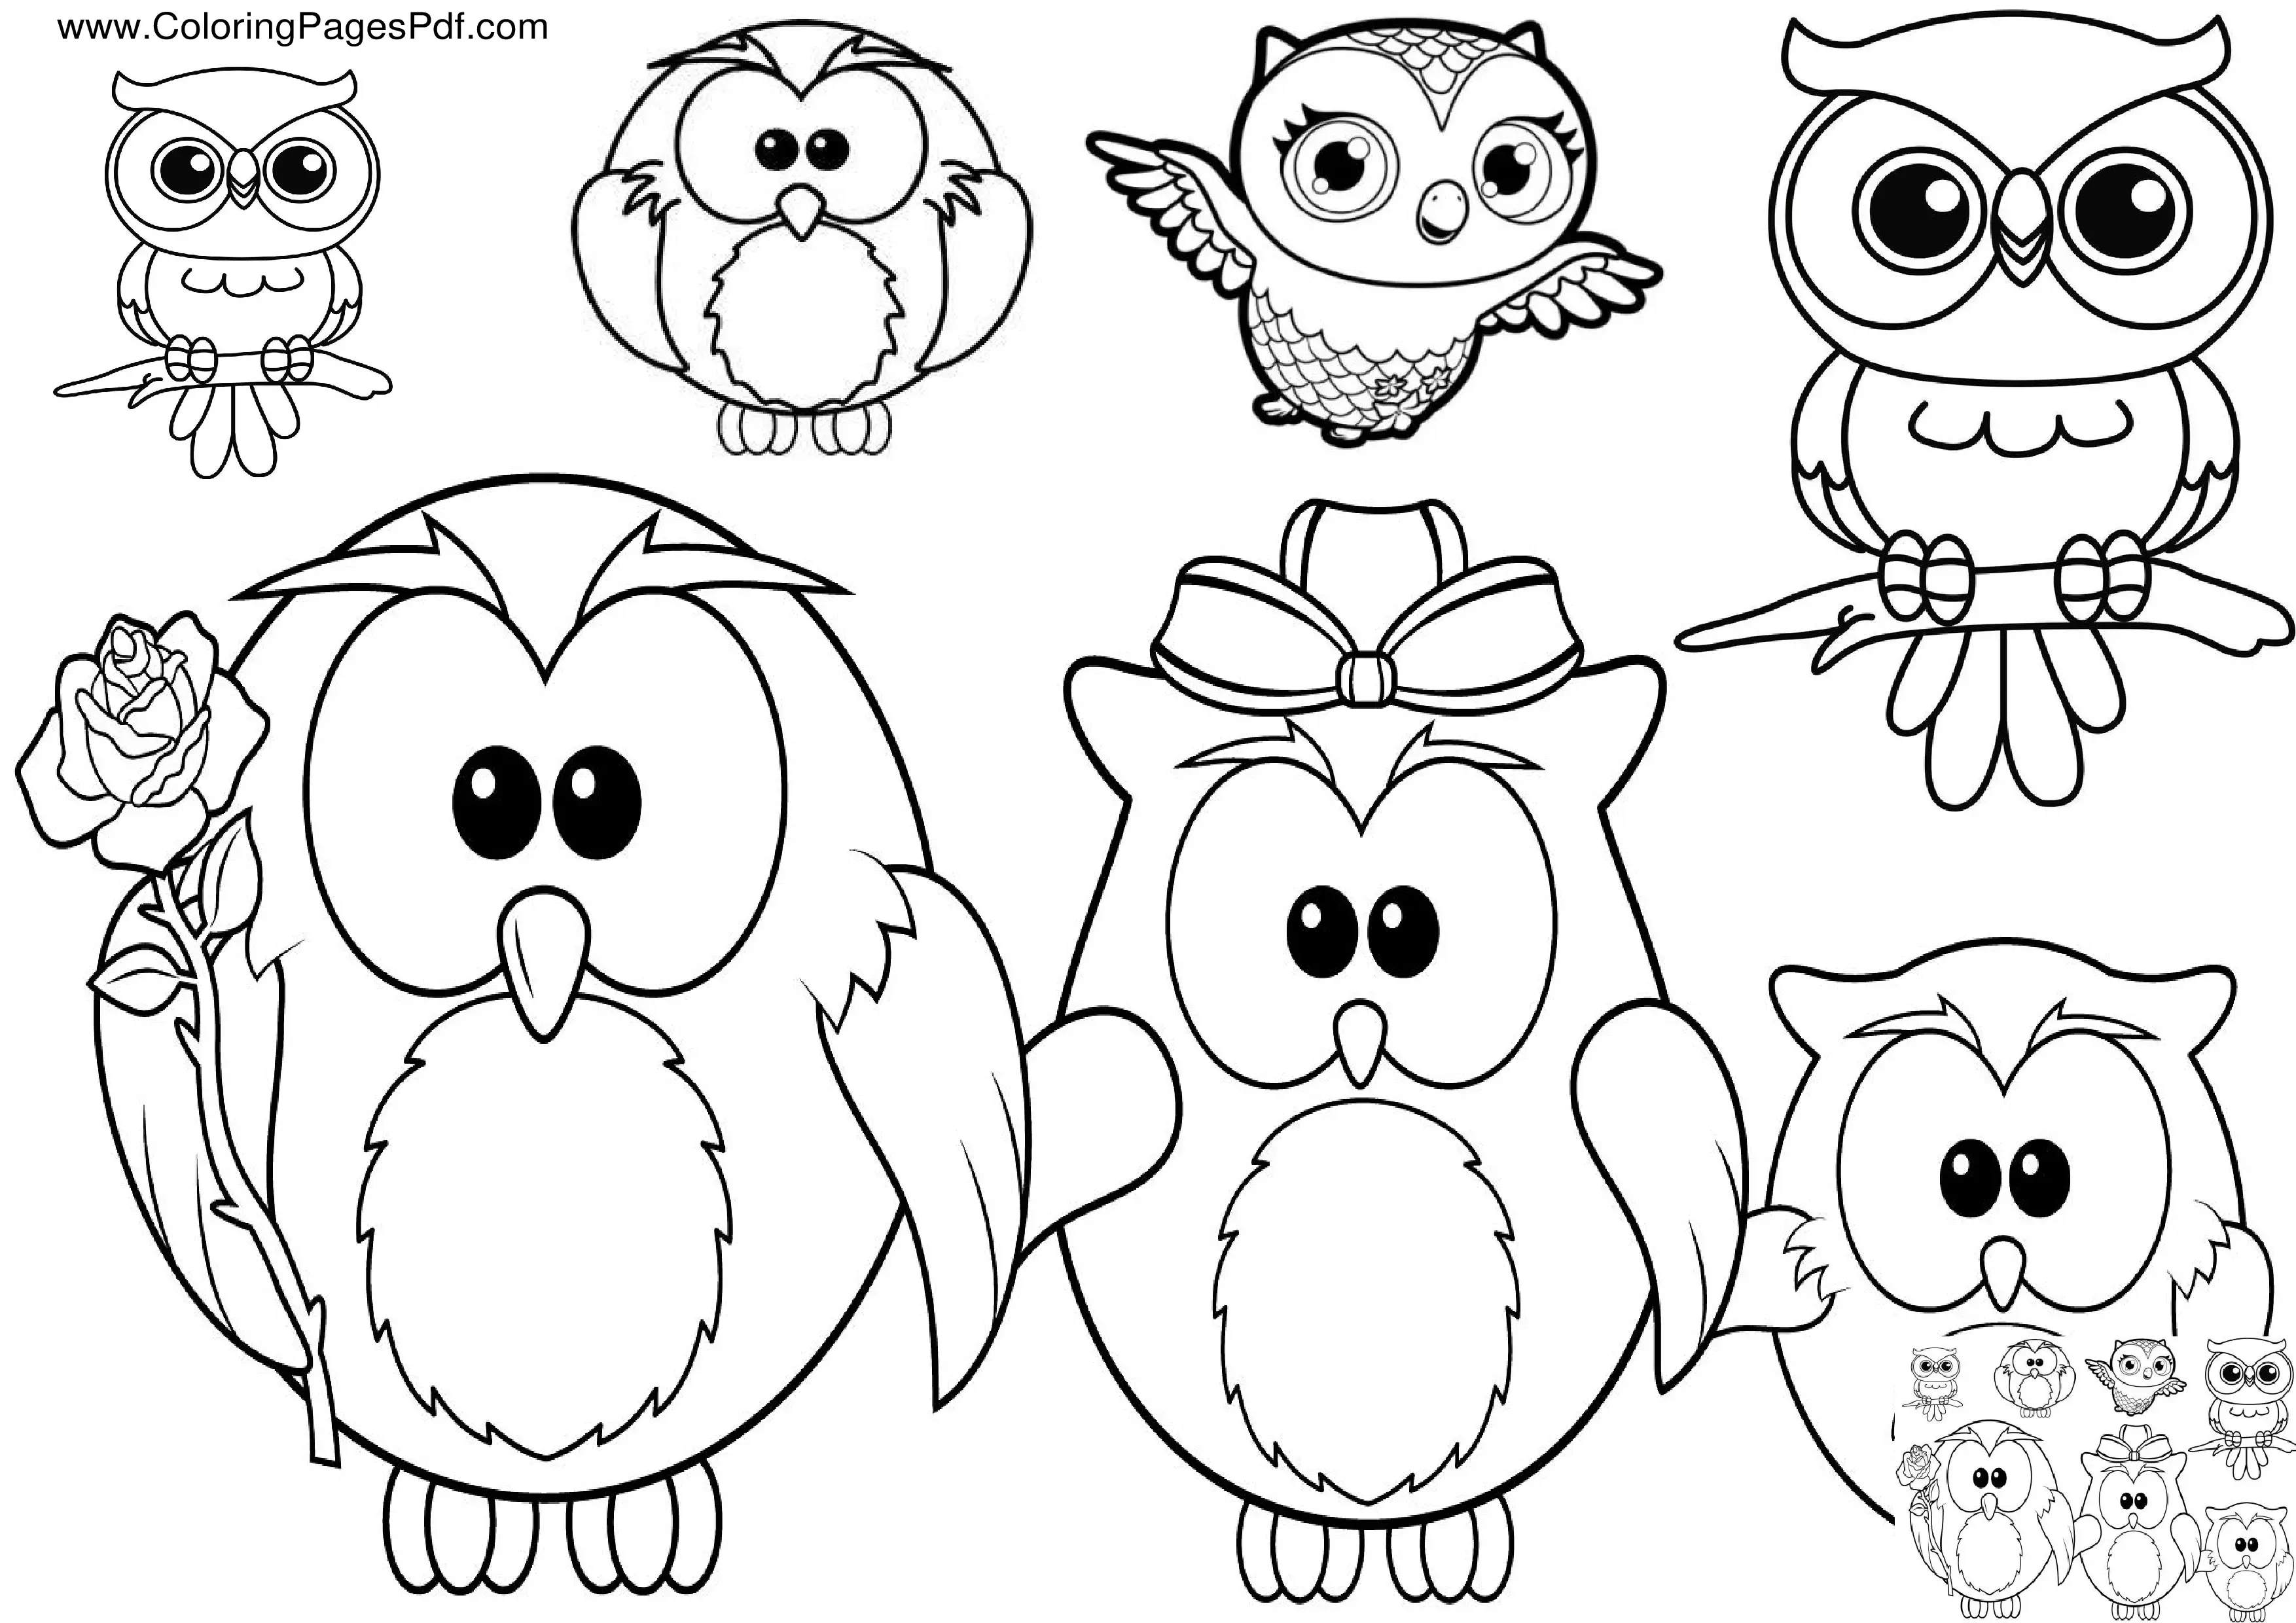 Baby owl coloring pages